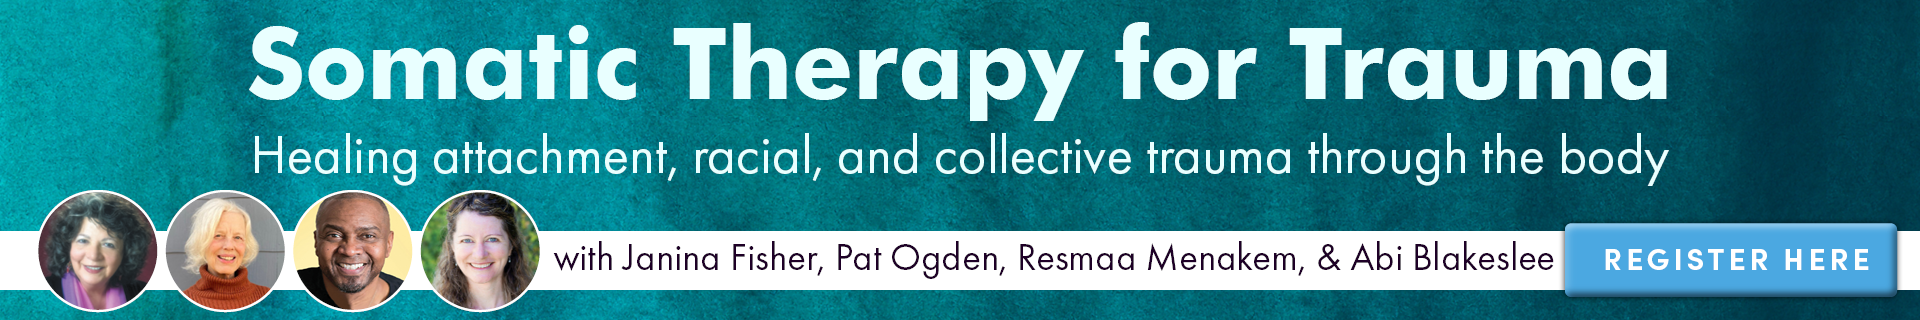 Somatic Therapy for Trauma Treatment: Healing attachment, racial, and collective trauma through the body